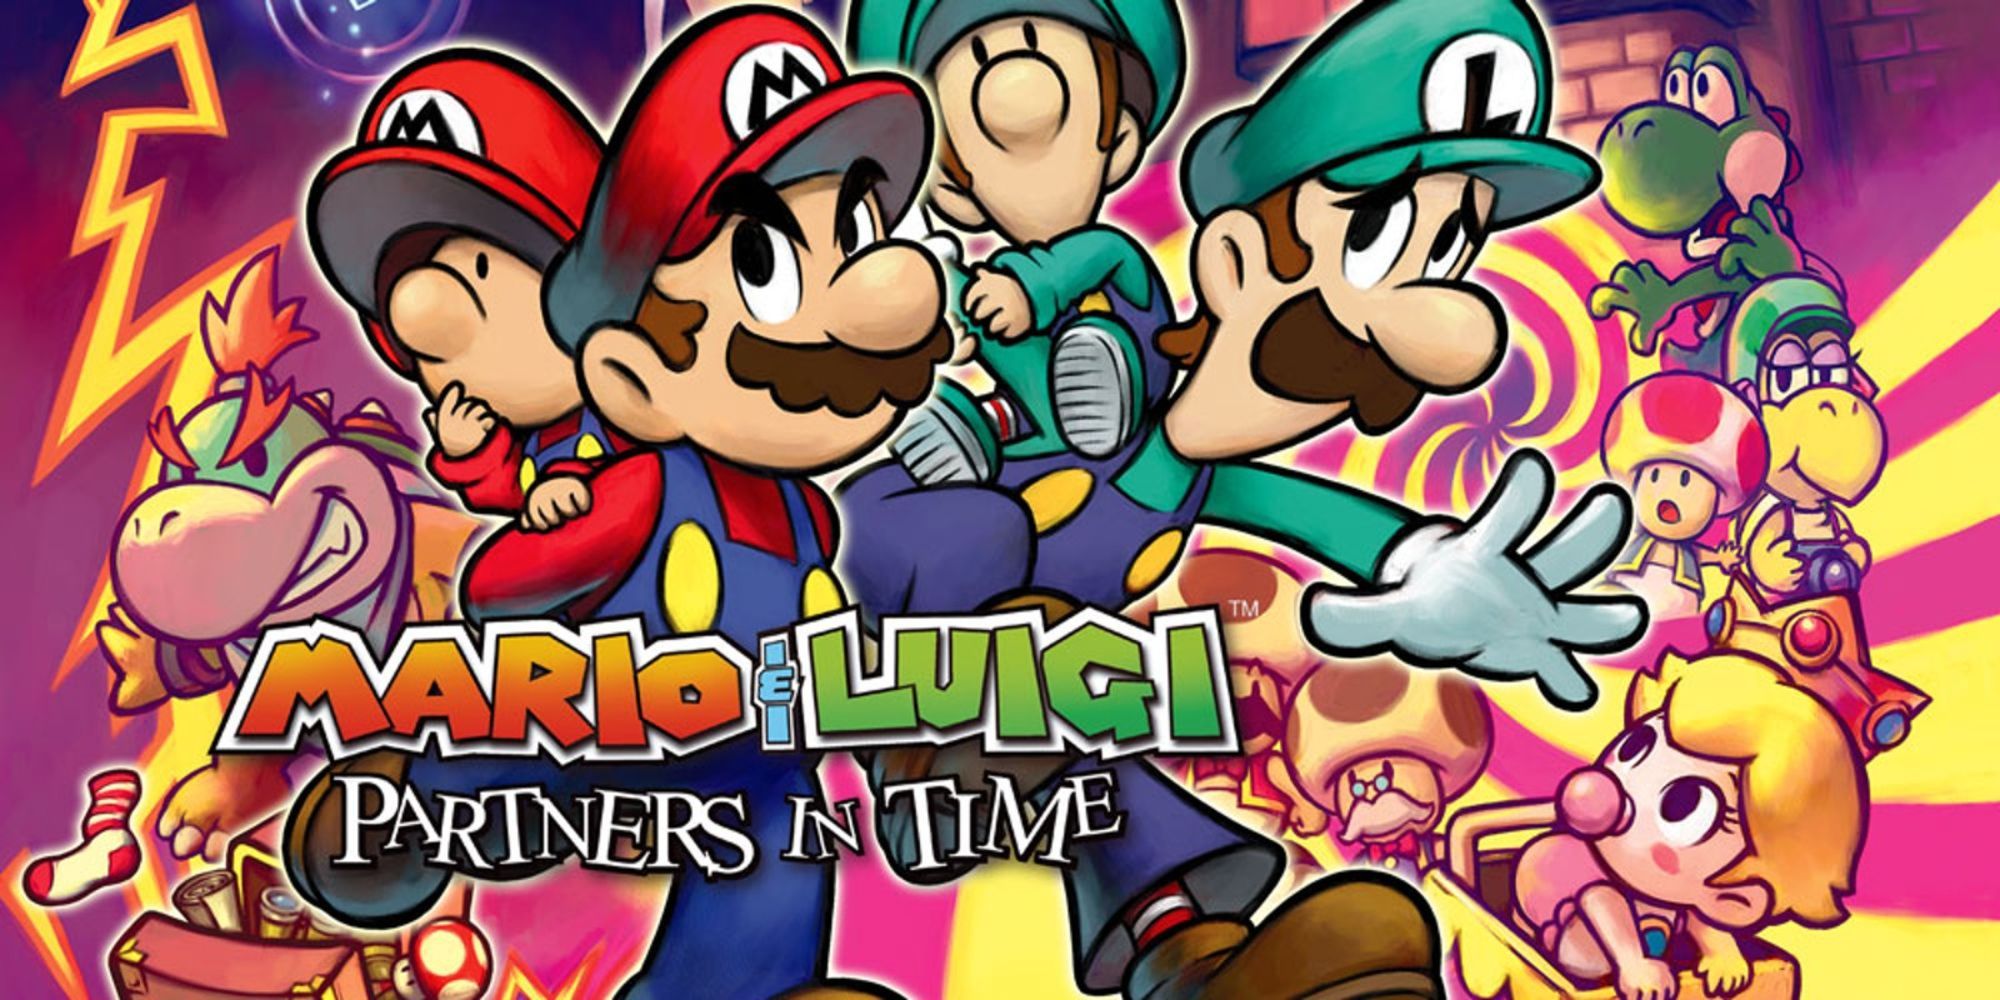 Mario frowns next to a frightened Luigi in front of the children's version in Partners in Time promotional art